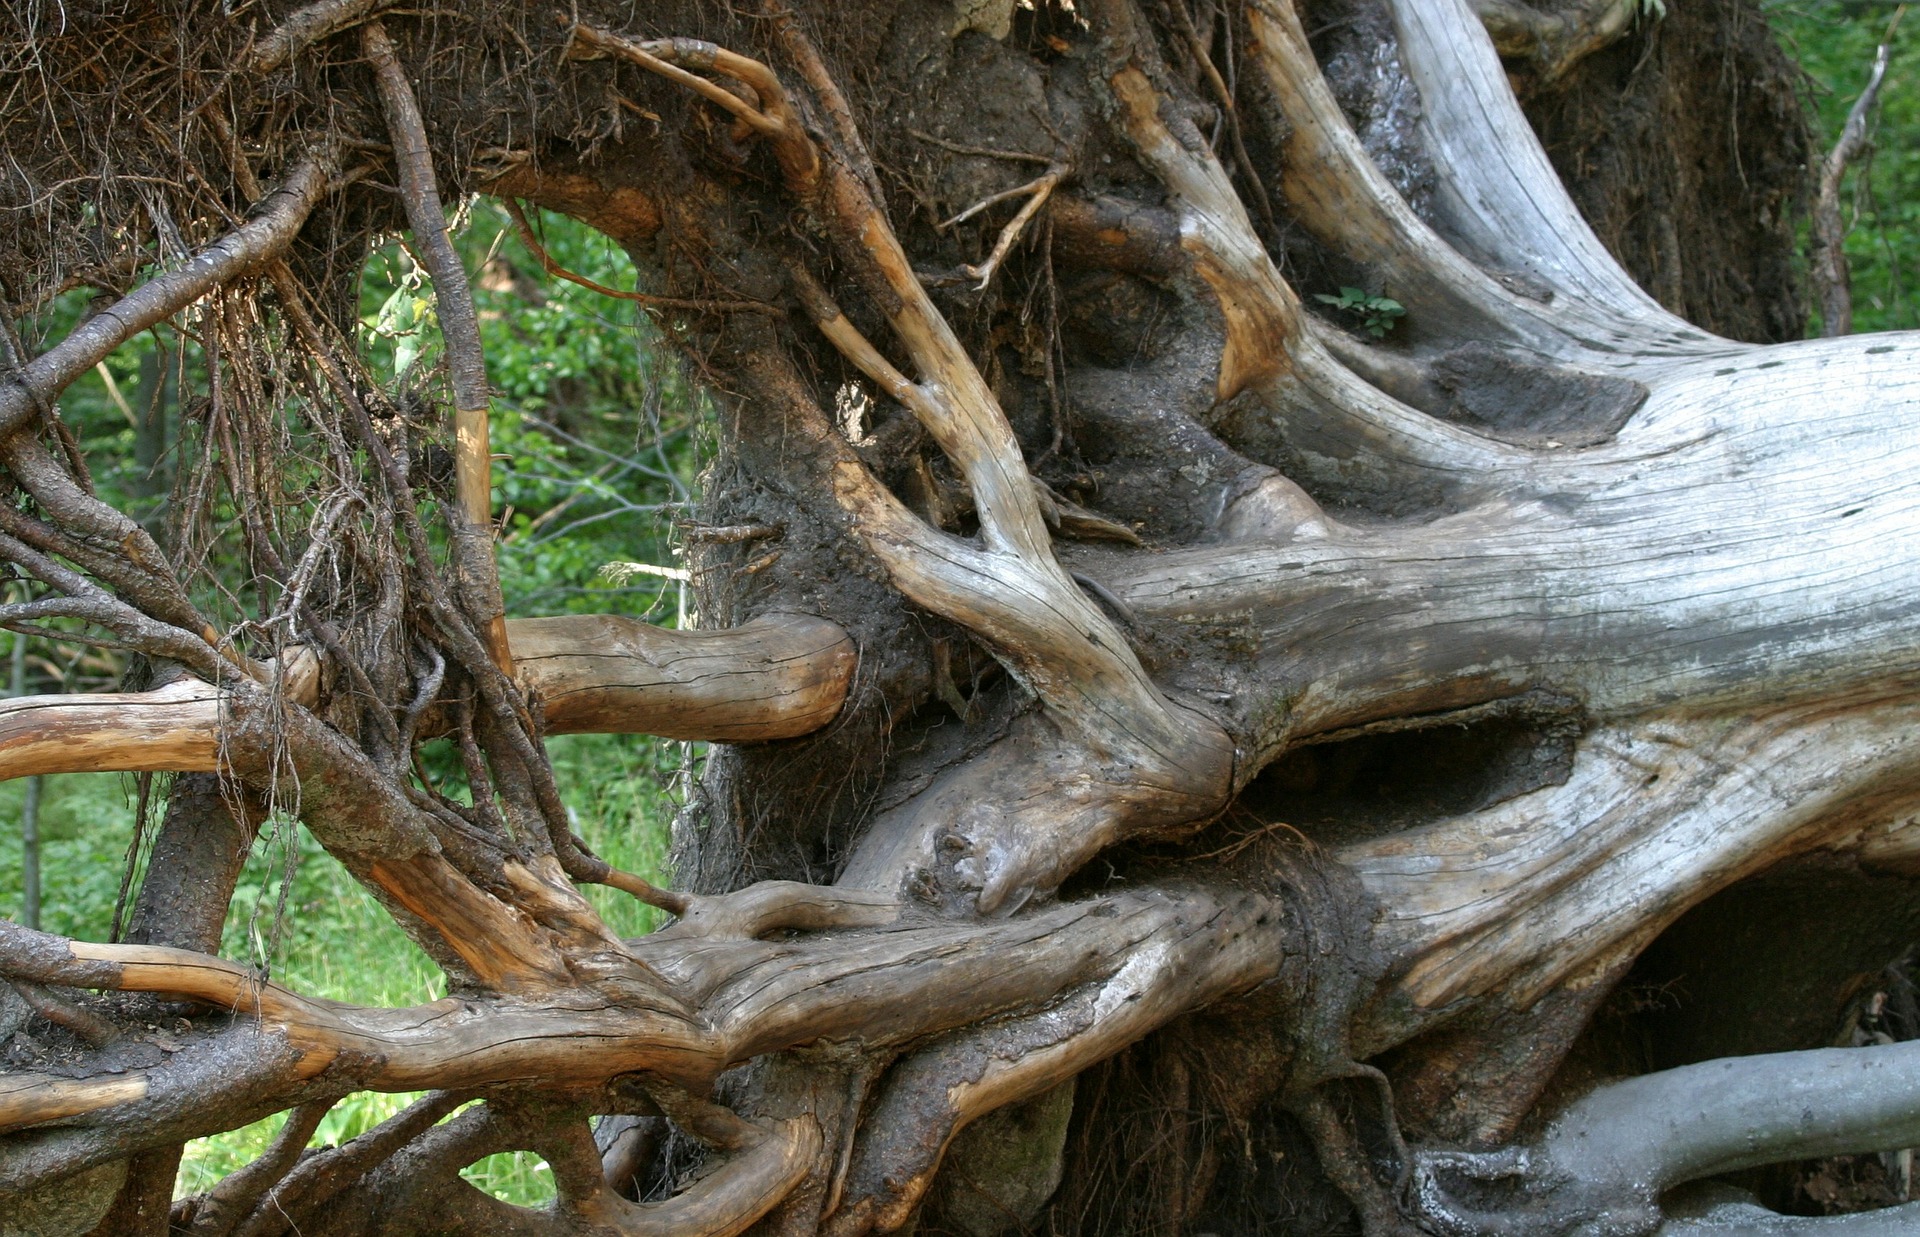 A tree root